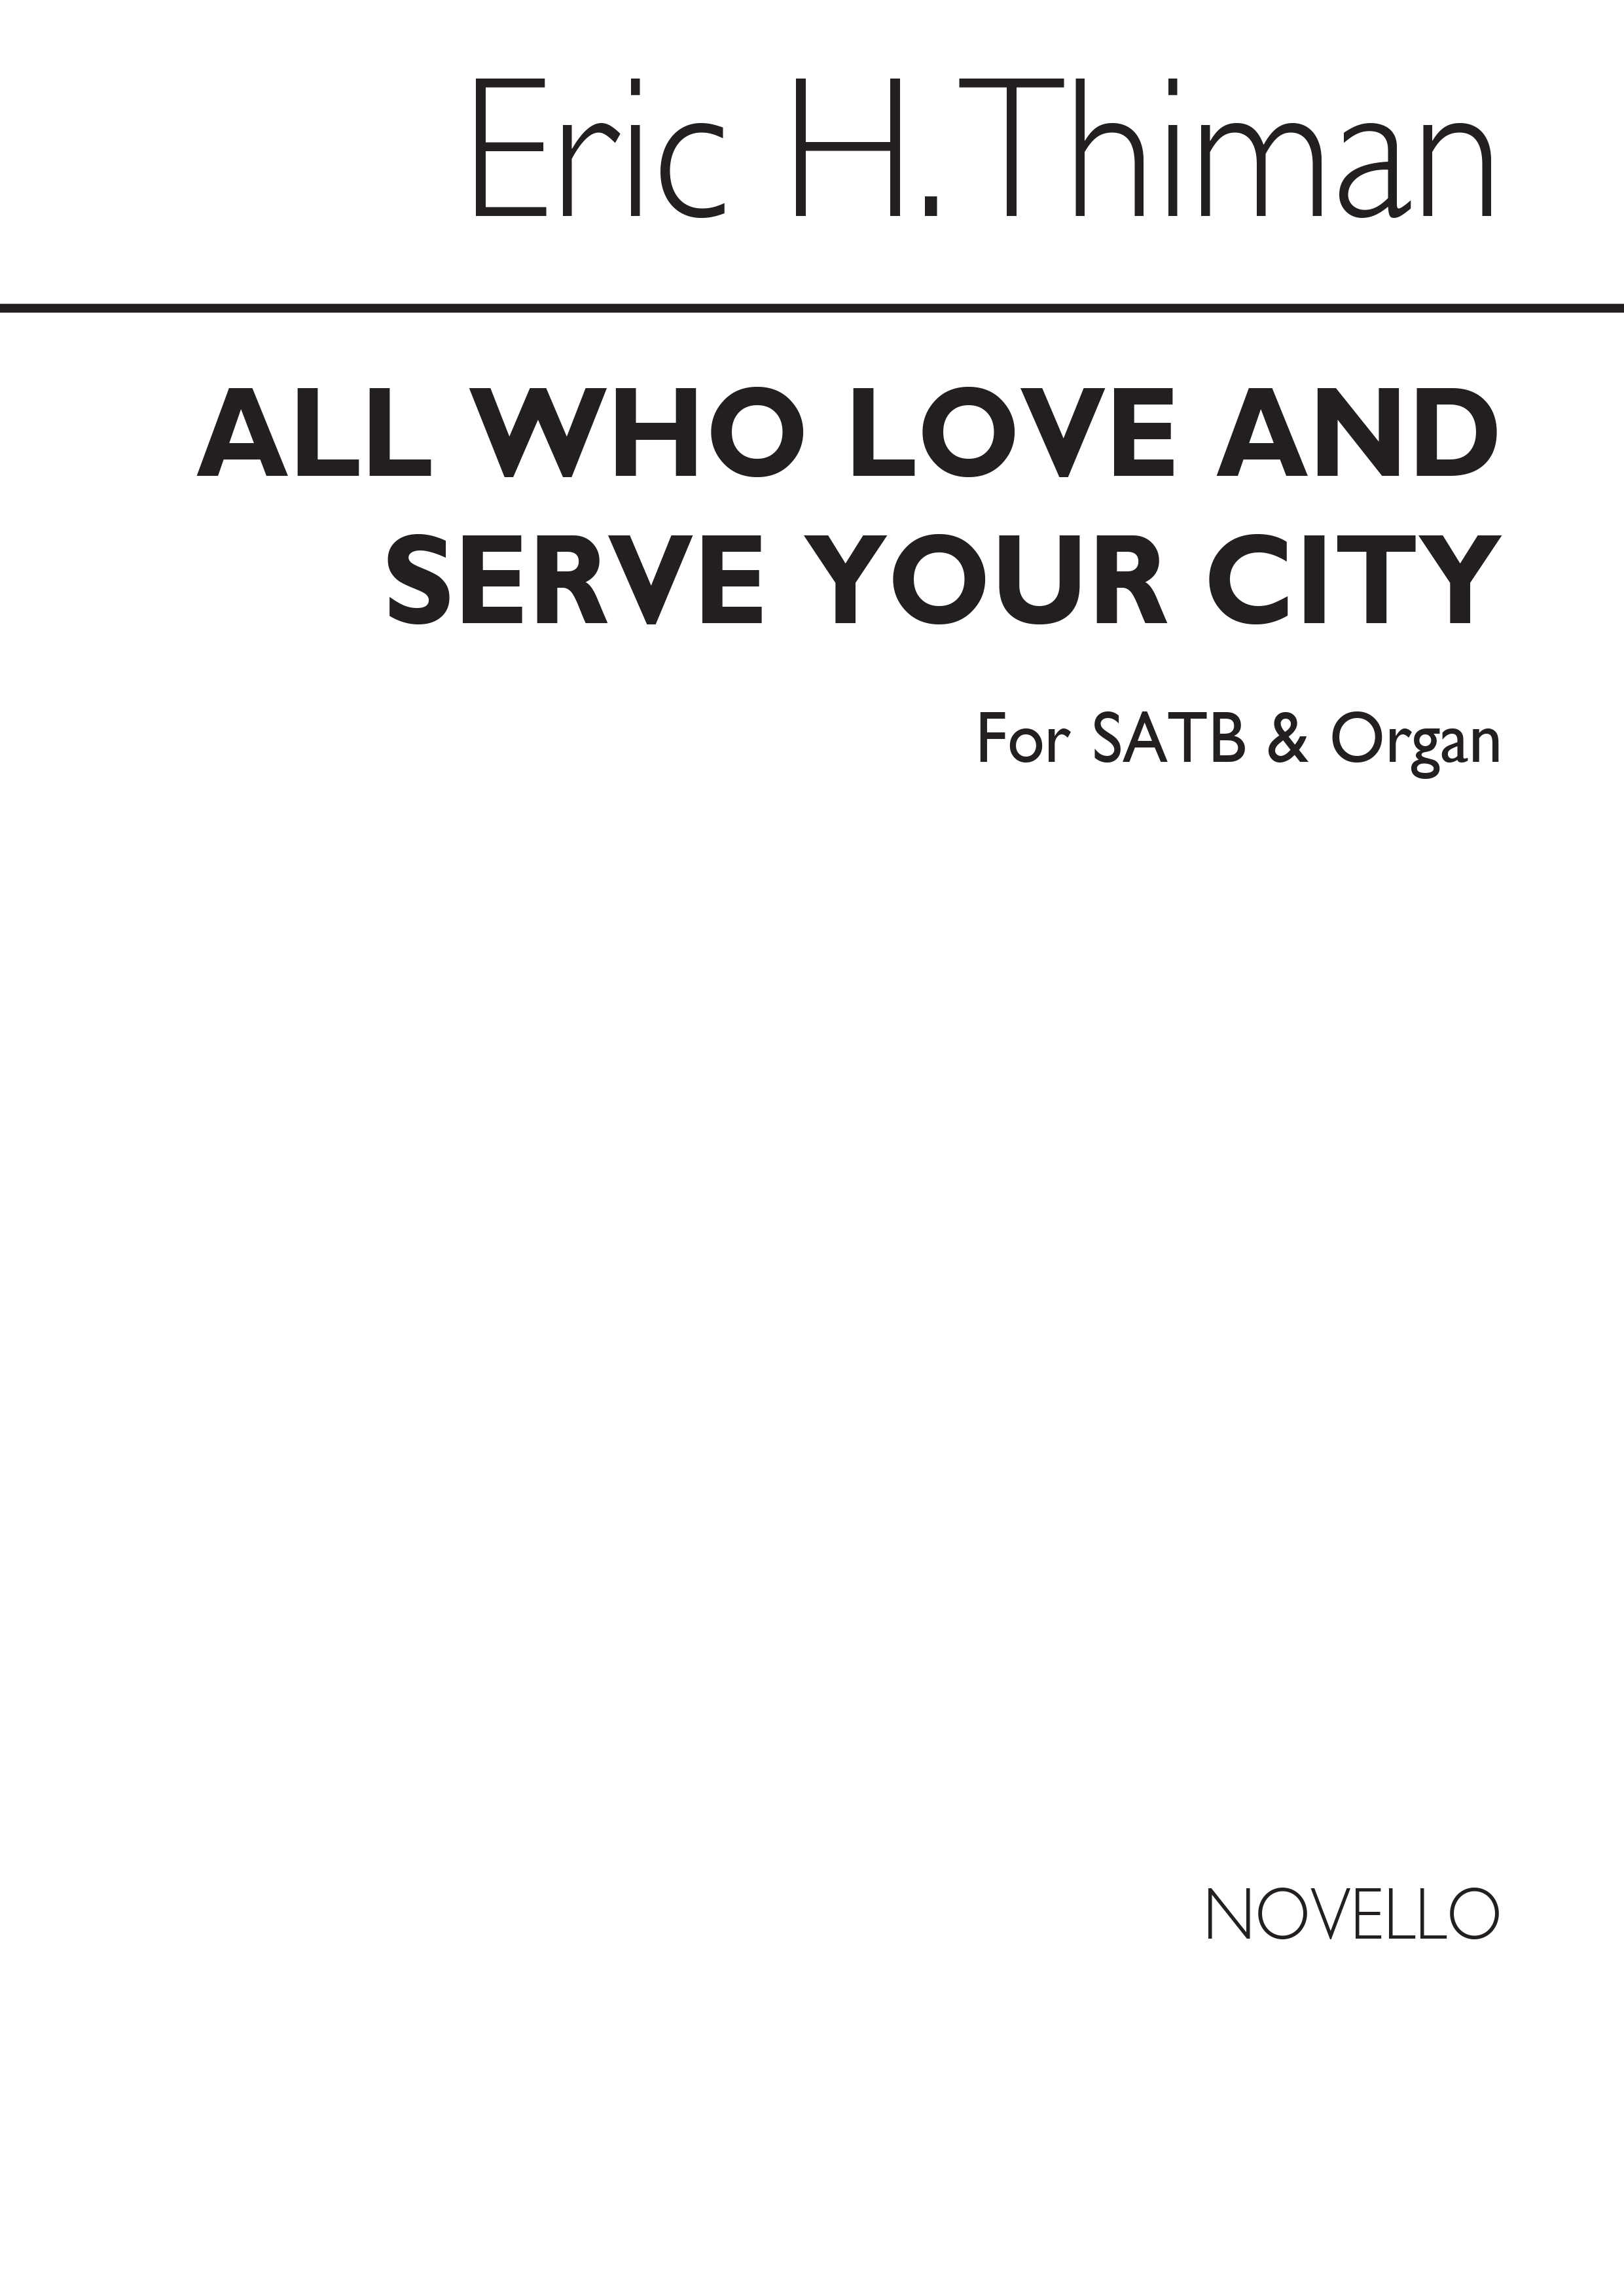 Thiman: All Who Love And Serve for SATB Chorus